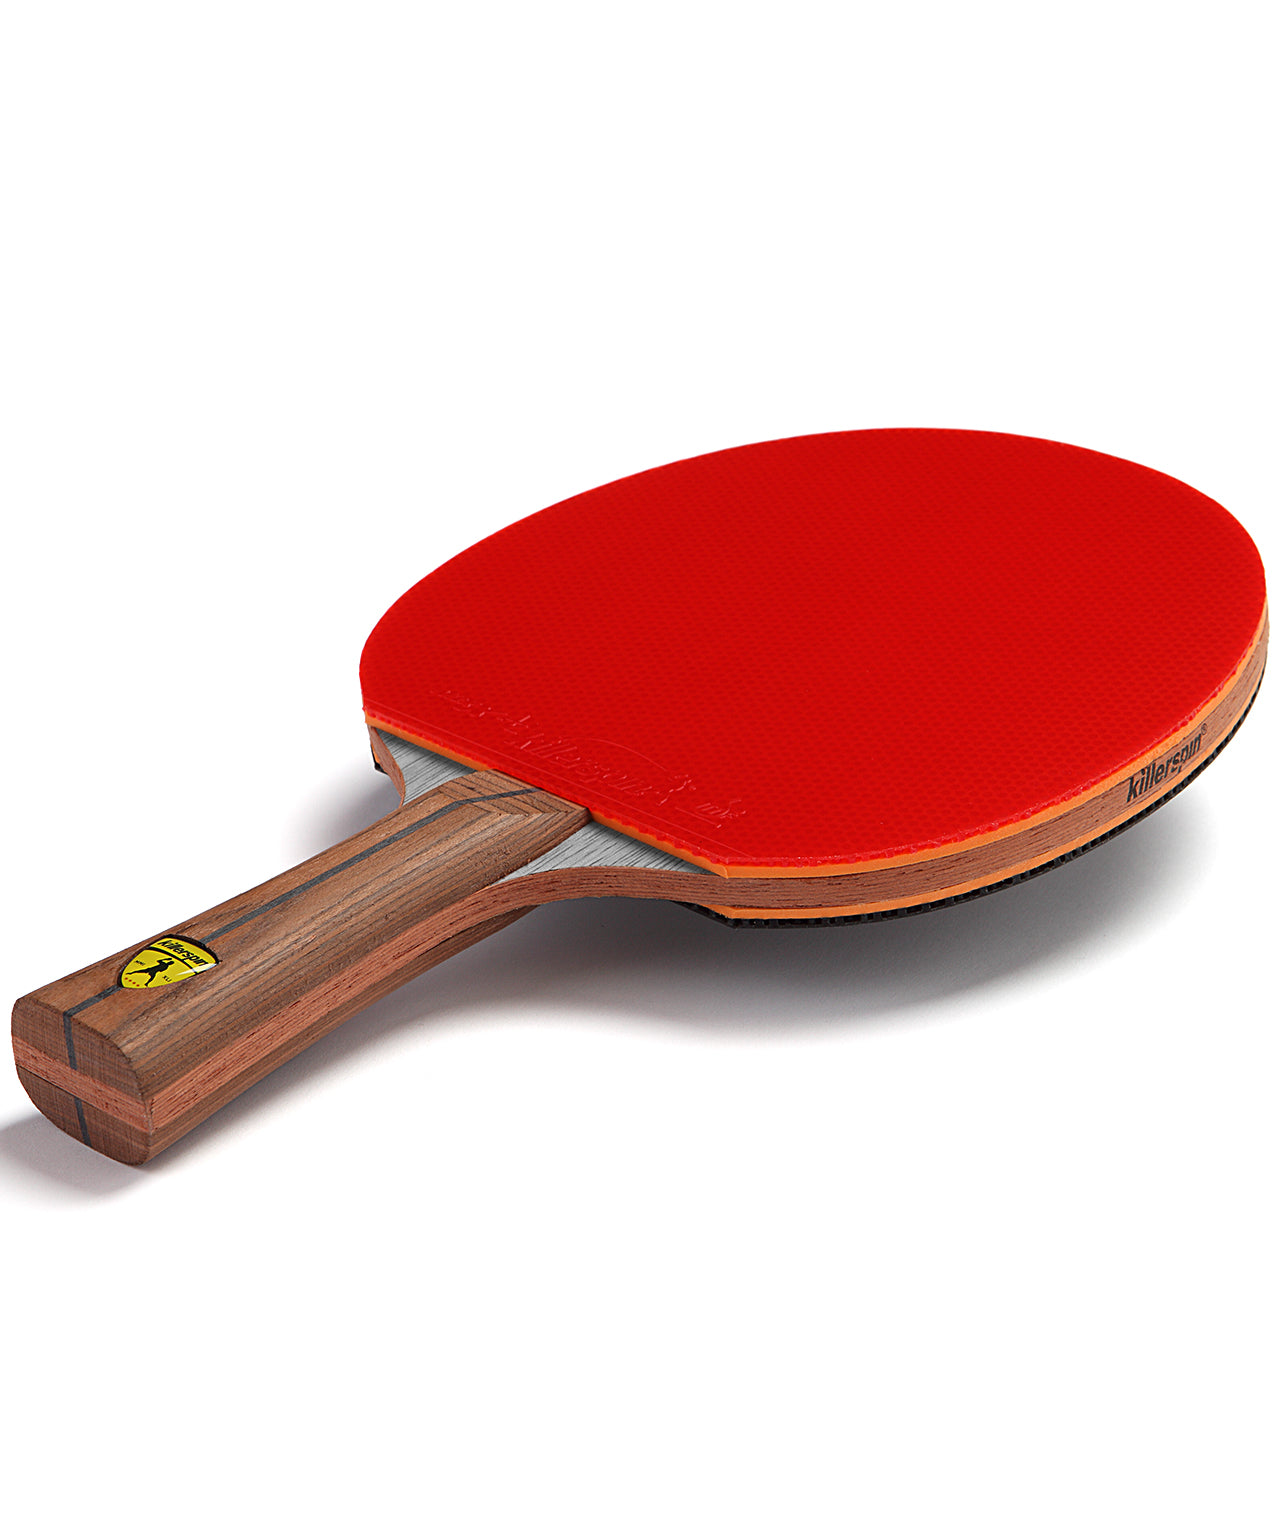 Killerspin Ping Pong Paddle Jet800 Speed N2 - Red Rubber